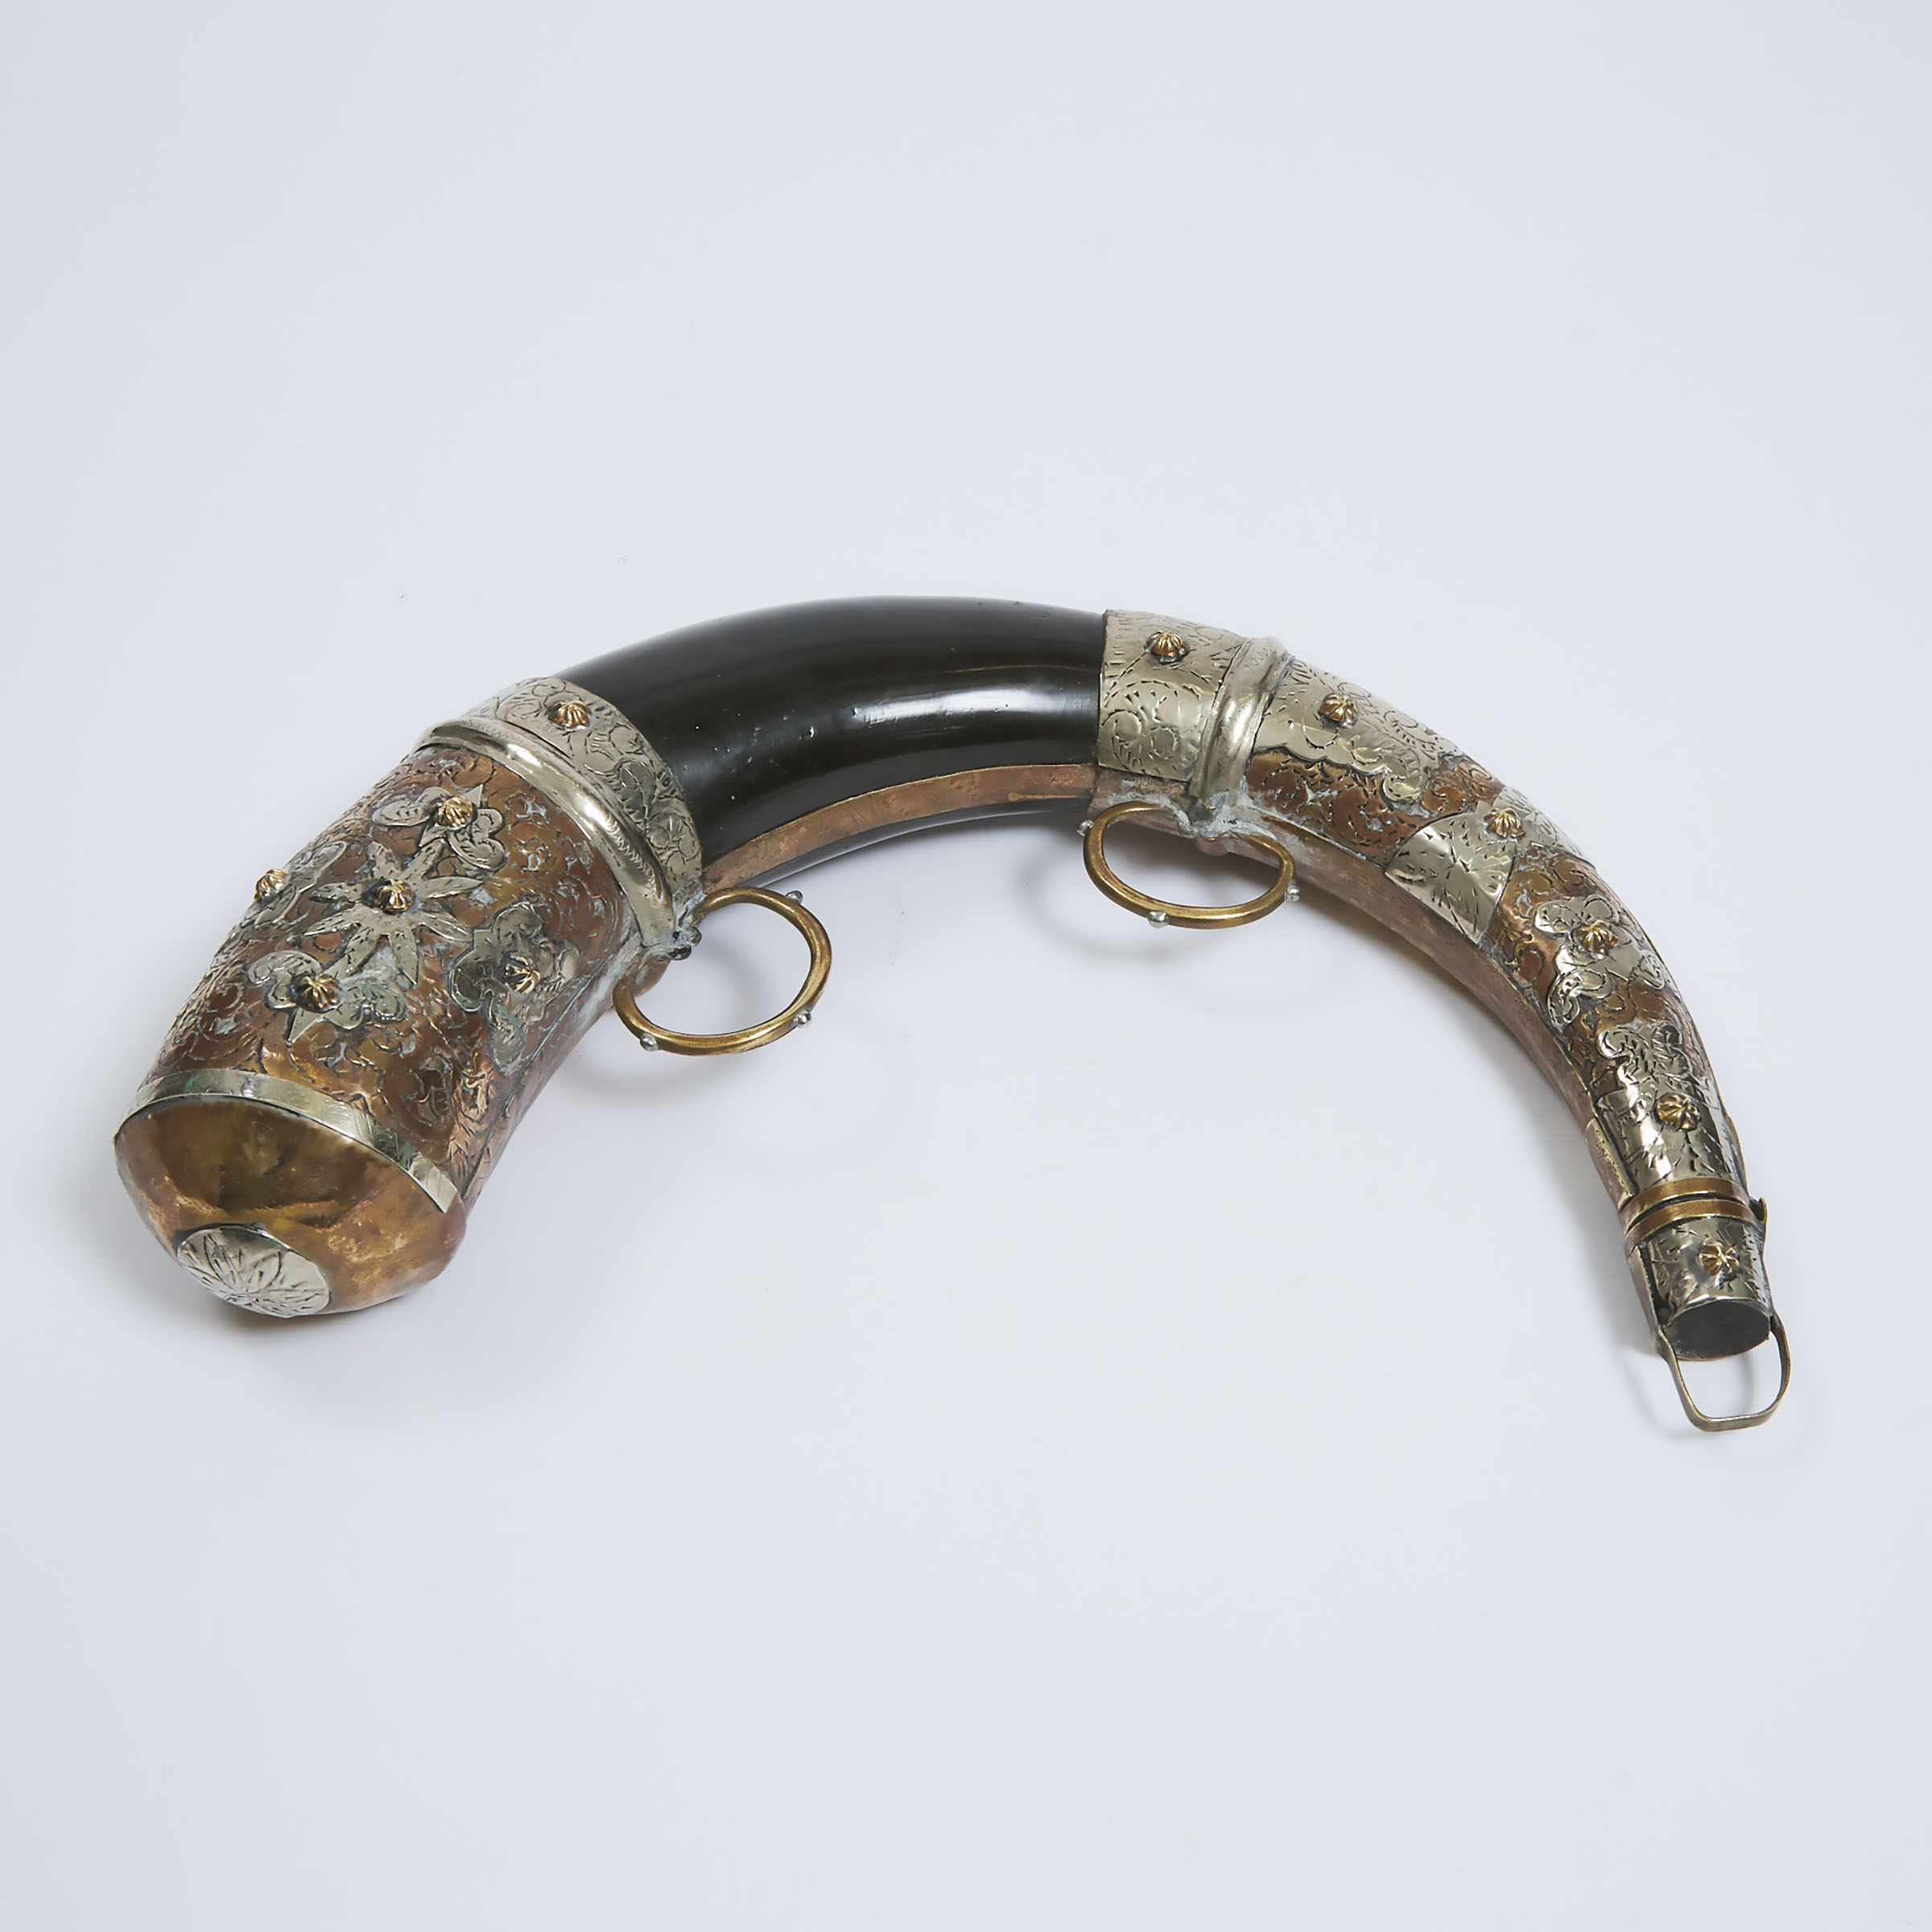 Moroccan Nickel Silver, Copper and Brass Mounted Powder Horn, early 20th century